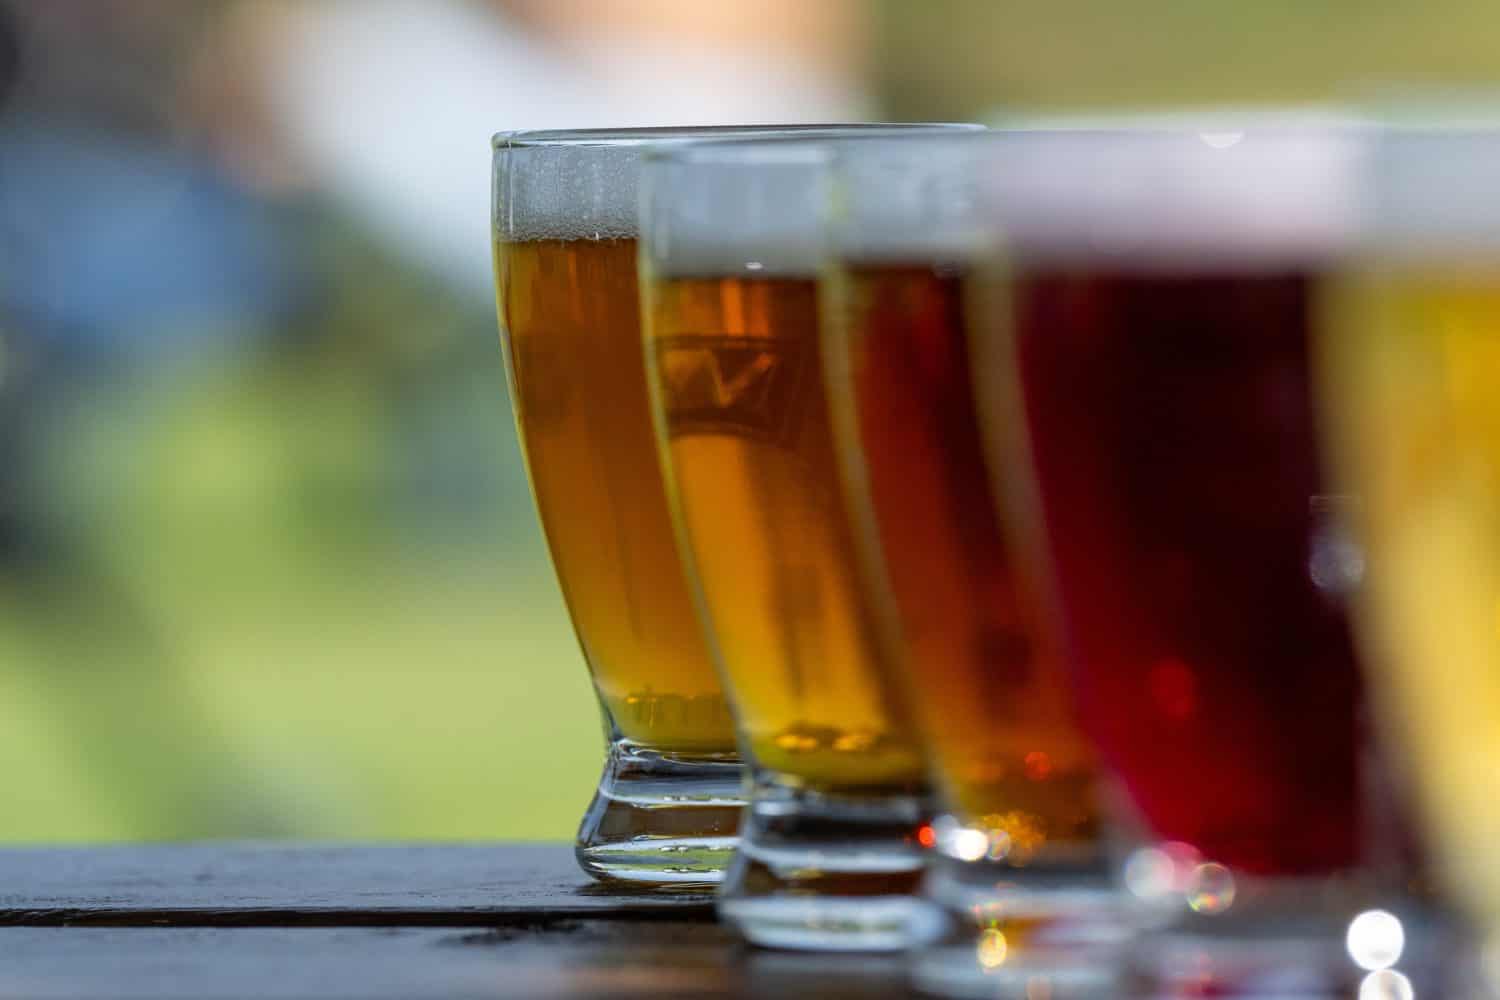 A row of small curved tulip shaped sample glasses of pale ale beer with froth on the top. The liquid alcohol has a vibrant yellow tint. The glasses are on a wooden table with circles.